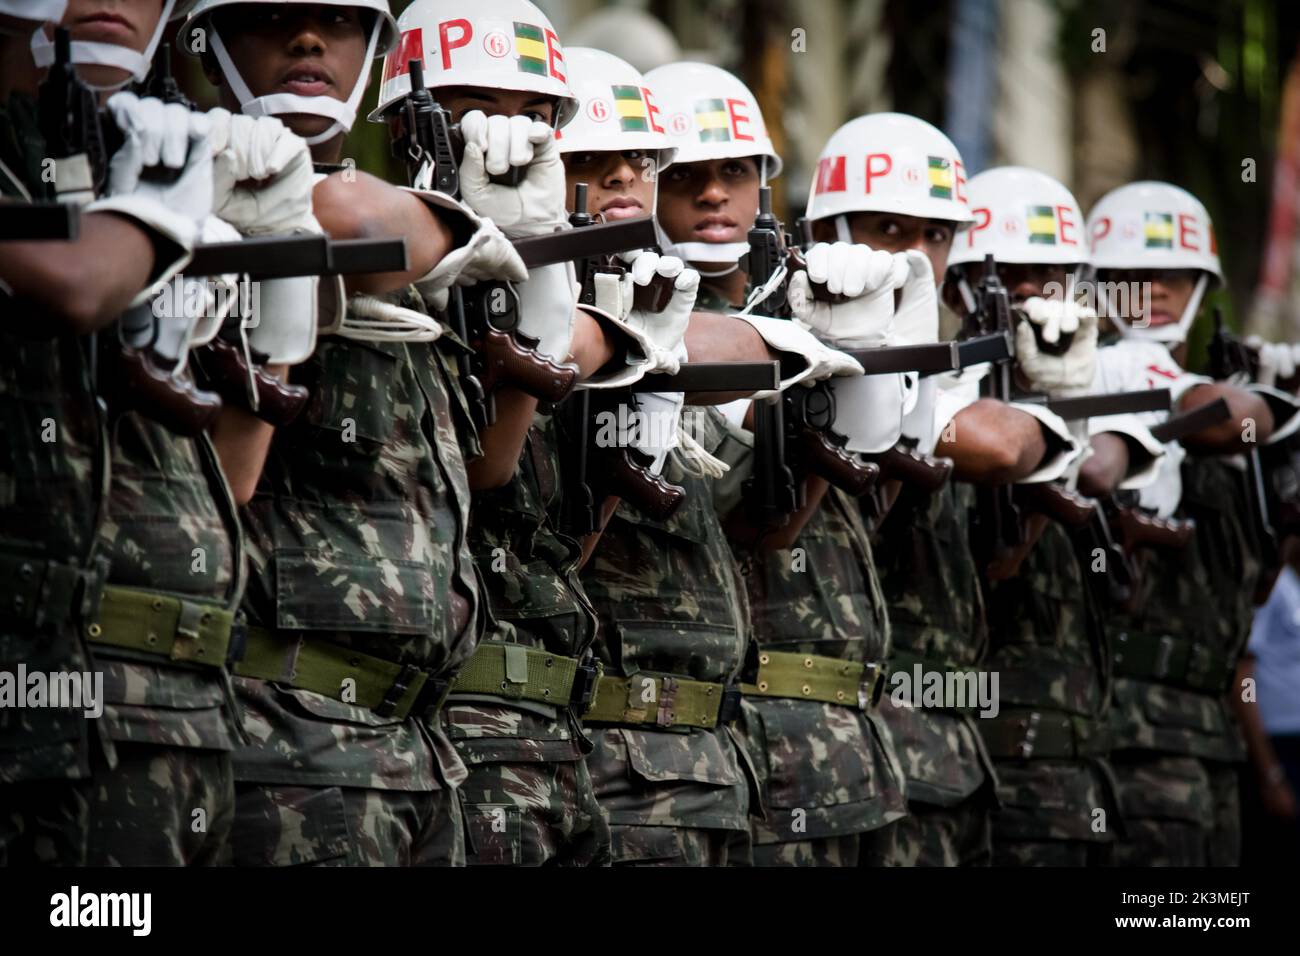 salvador, bahia, brazil - september 7, 2016: Brazilian Army soldiers during military parade in celebration of Brazil independence in the city of Salva Stock Photo